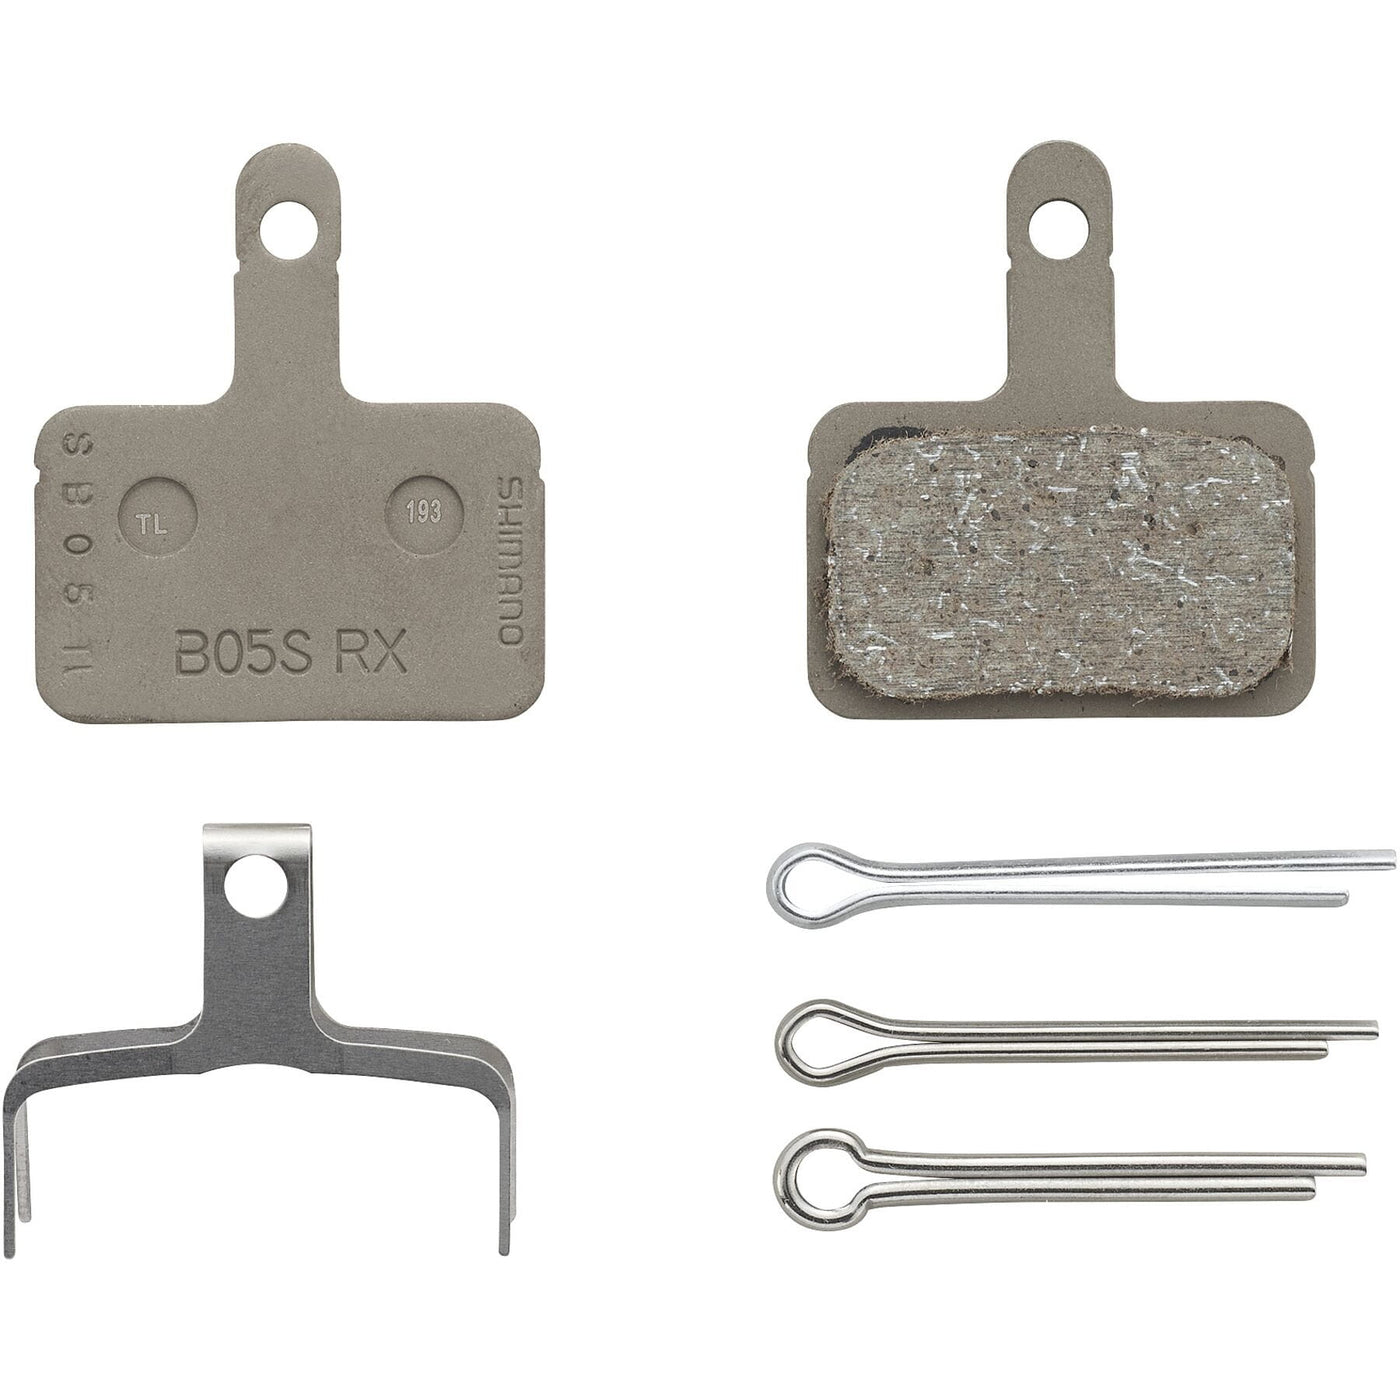 SHIMANO B05S disc brake pads and spring, steel backed, Resin